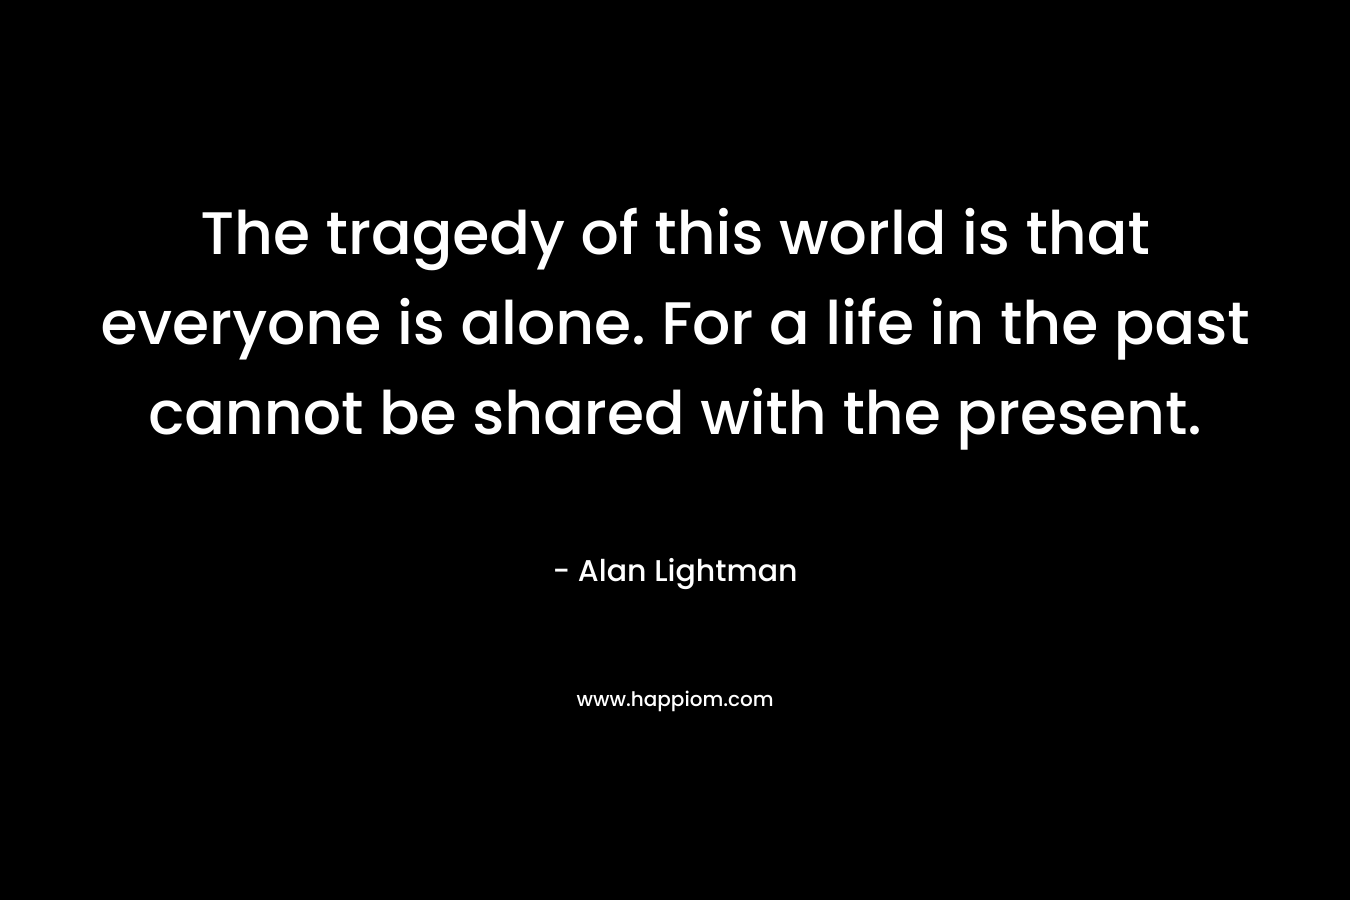 The tragedy of this world is that everyone is alone. For a life in the past cannot be shared with the present. – Alan Lightman